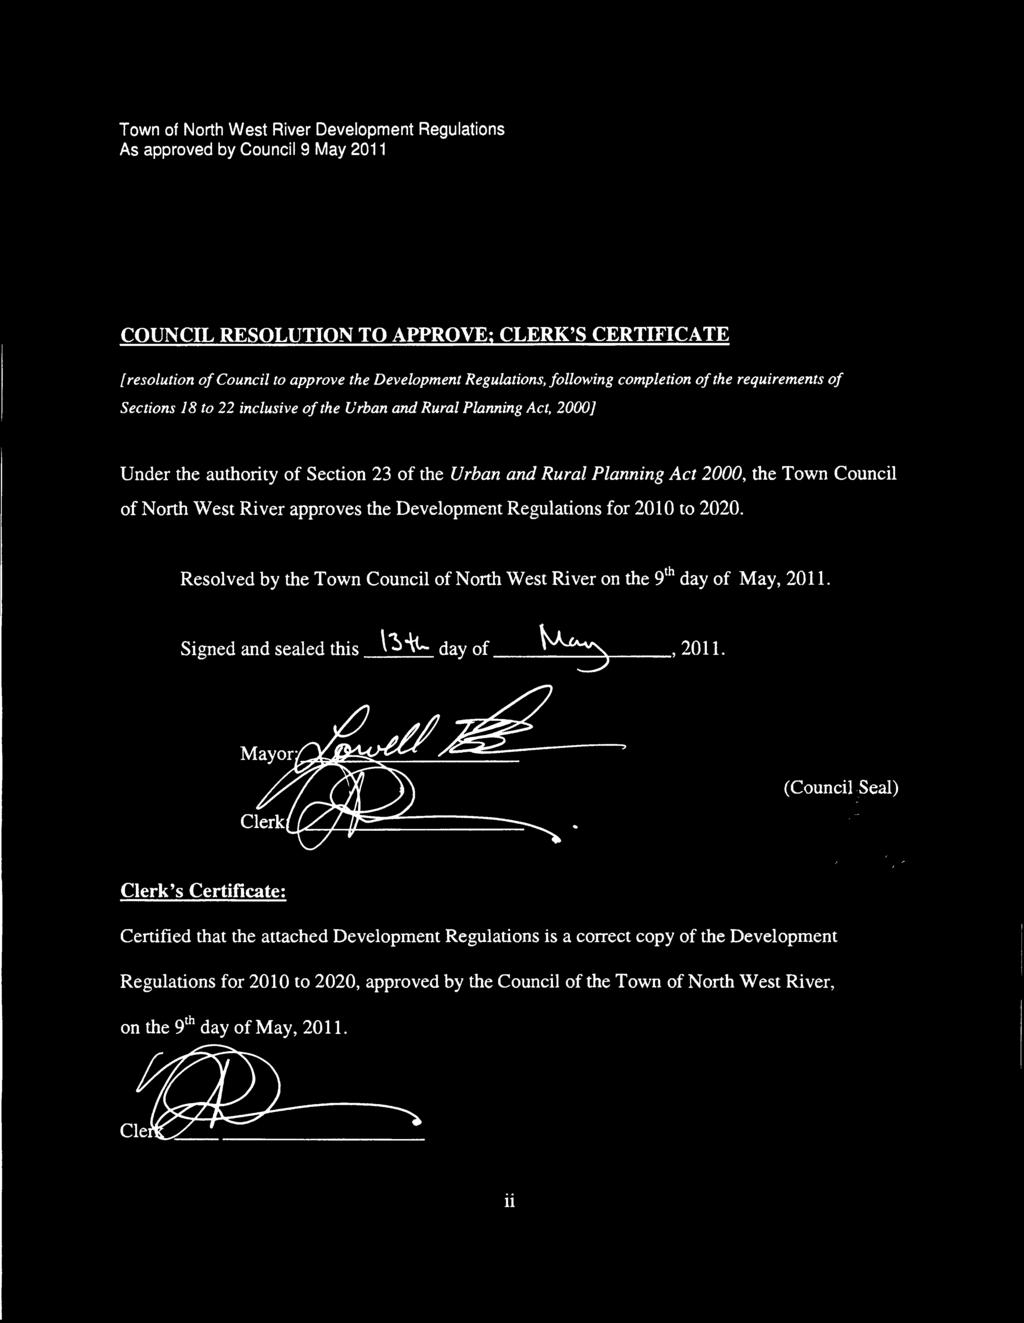 2020. Resolved by the Town Council of North West River on the 9th day of May, 2011. Signed and sealed this k'sit- day of, 2011.